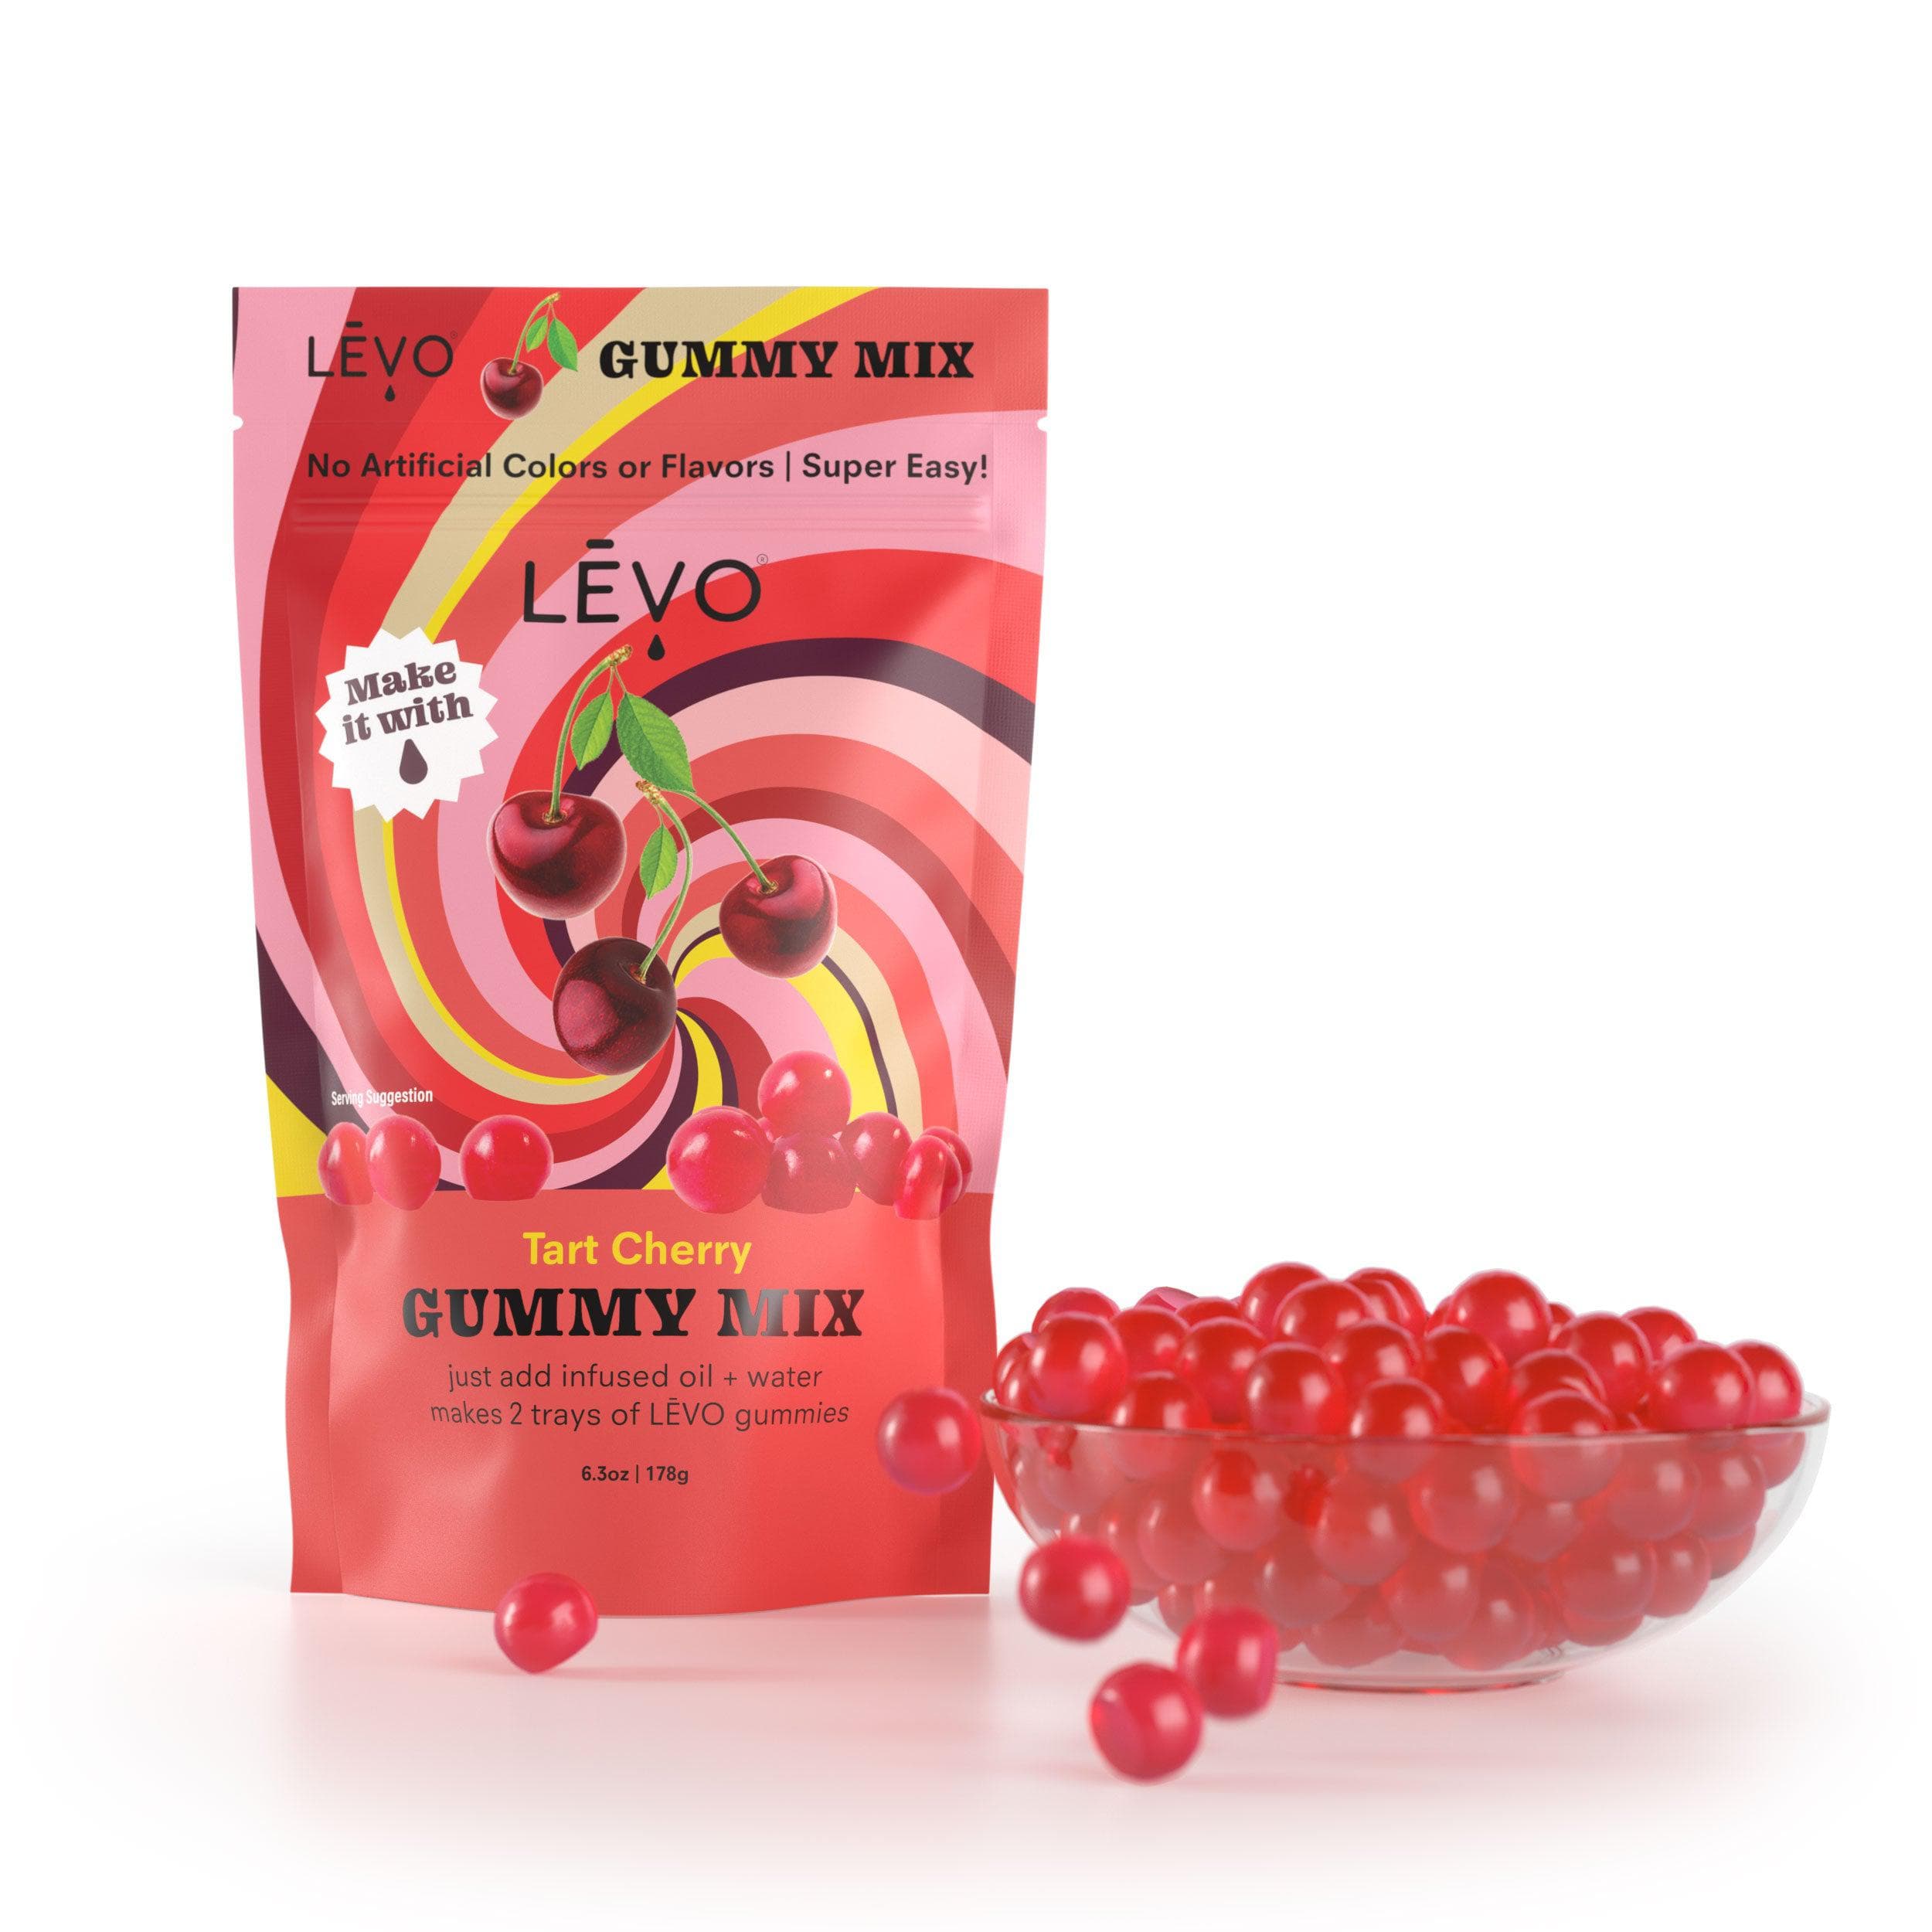 Our most requested video! How to make LEVO Gummy Mix, featuring